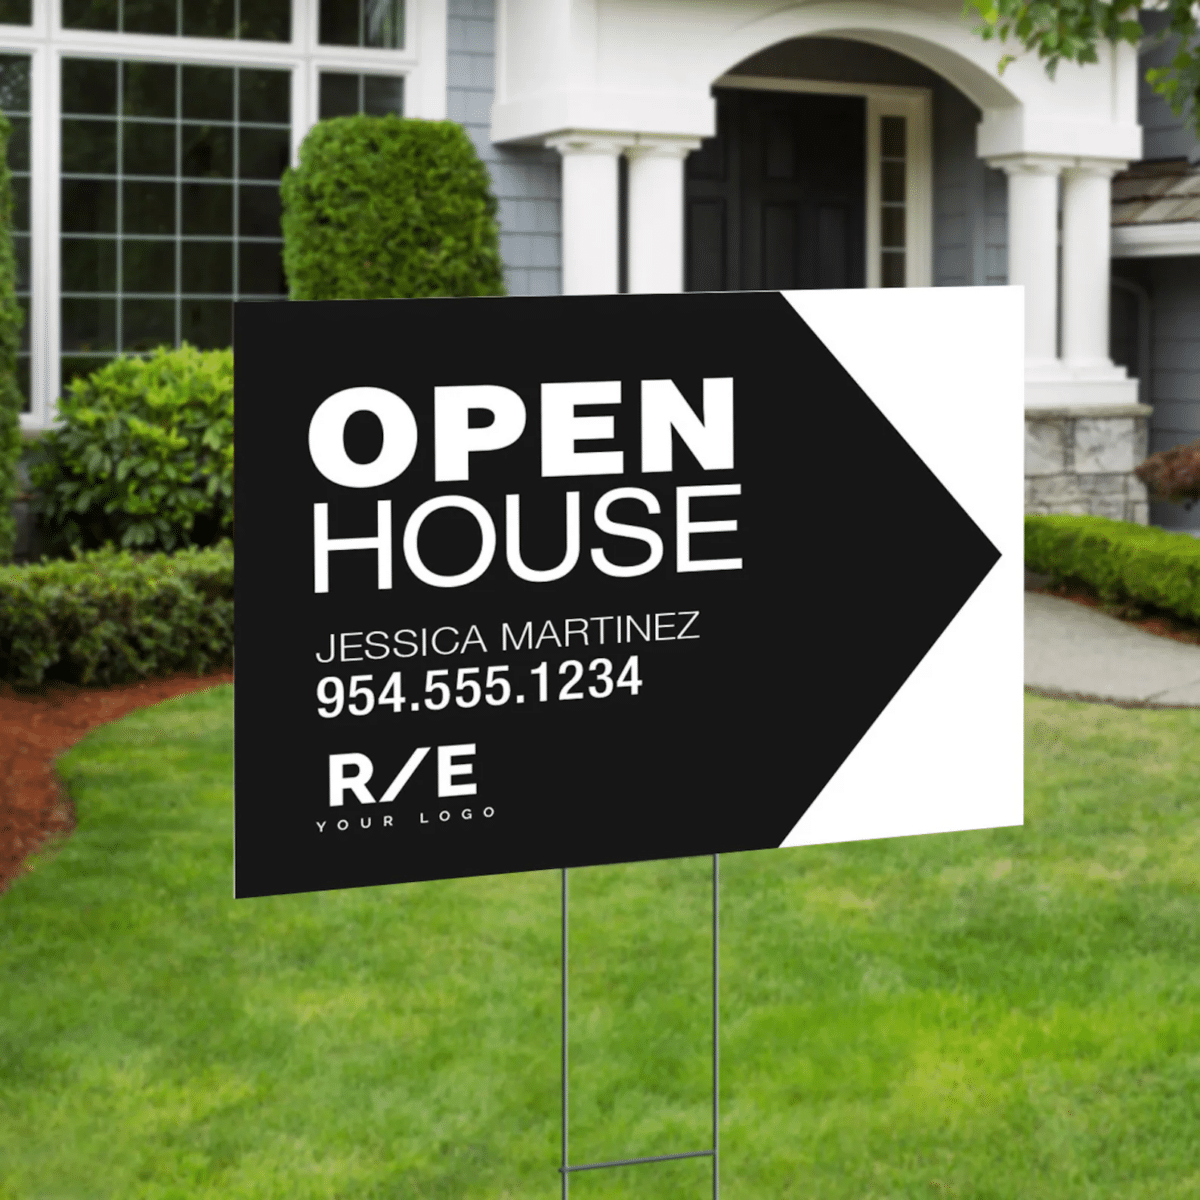 A black and white, minimalist real estate sign with an arrow